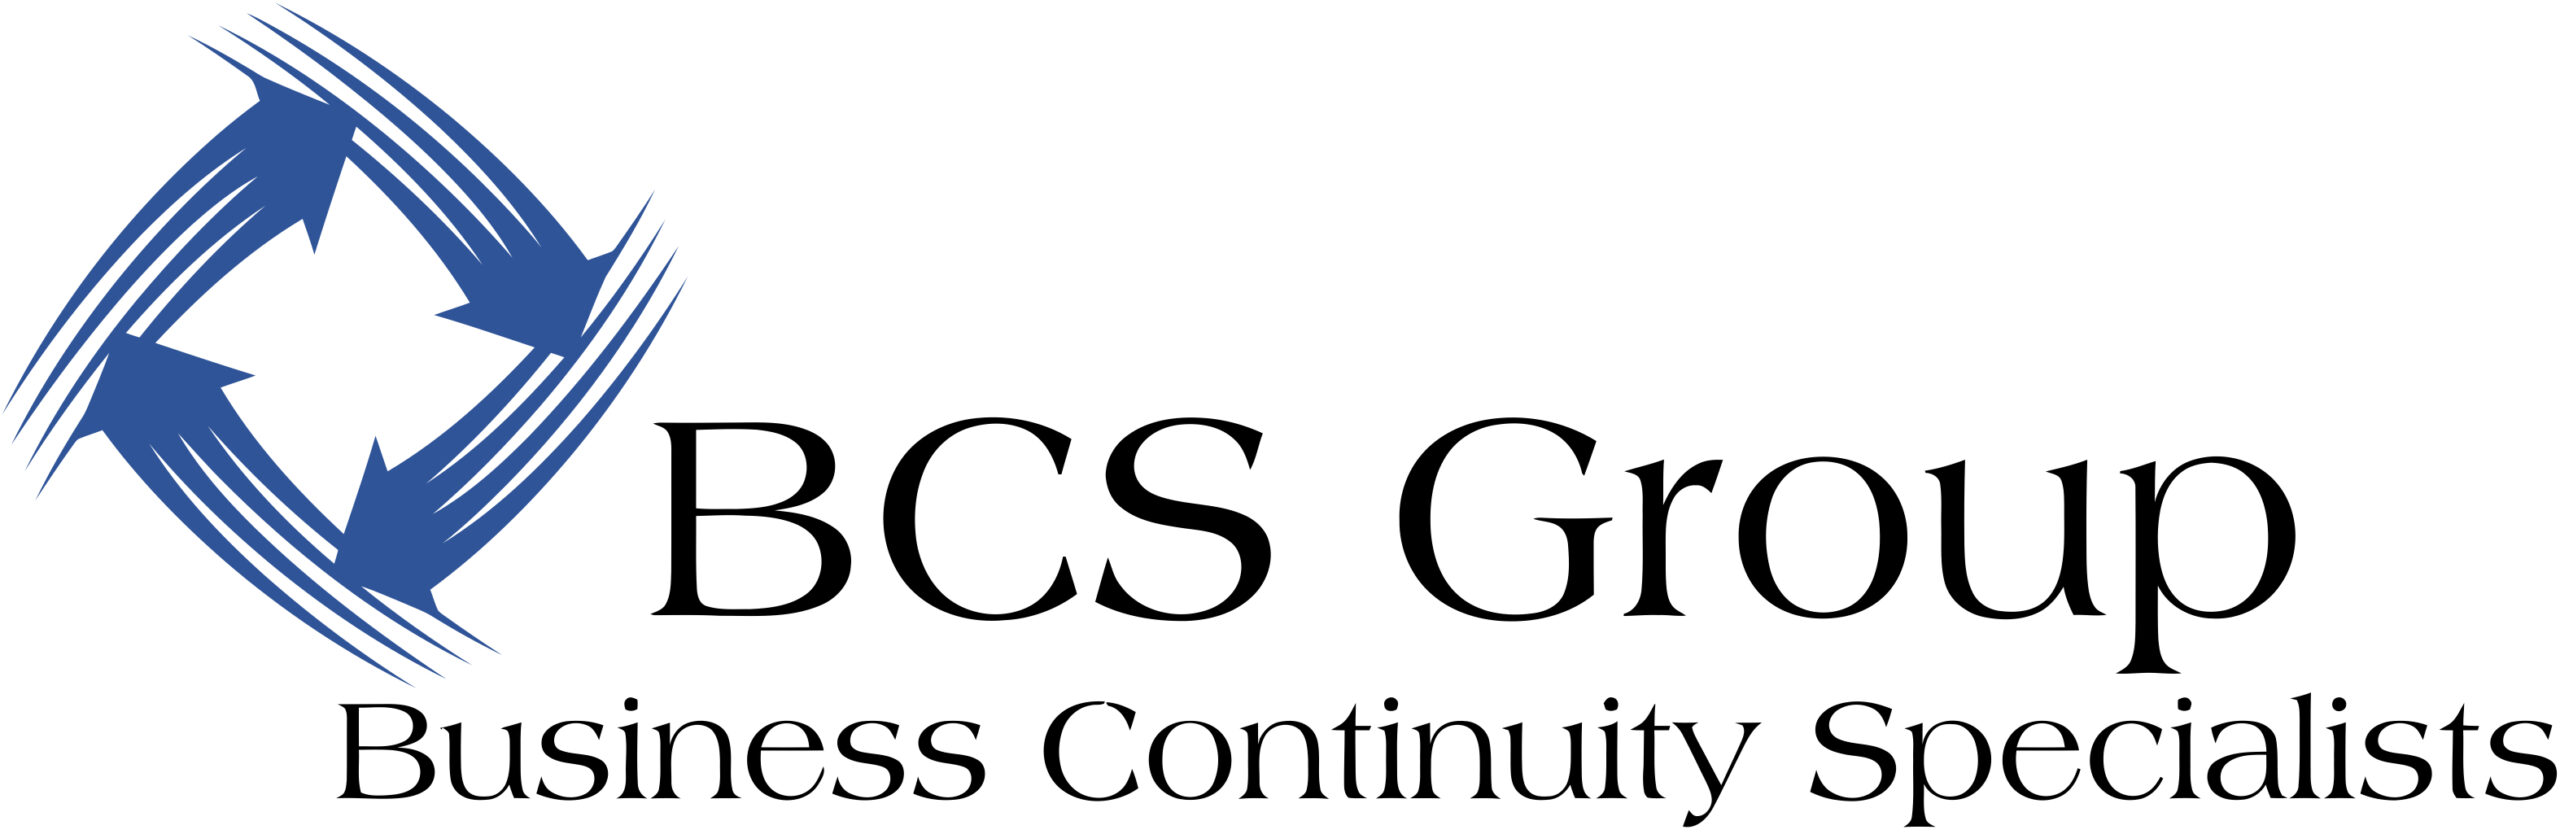 BCS Group – Business Continuity Specialists